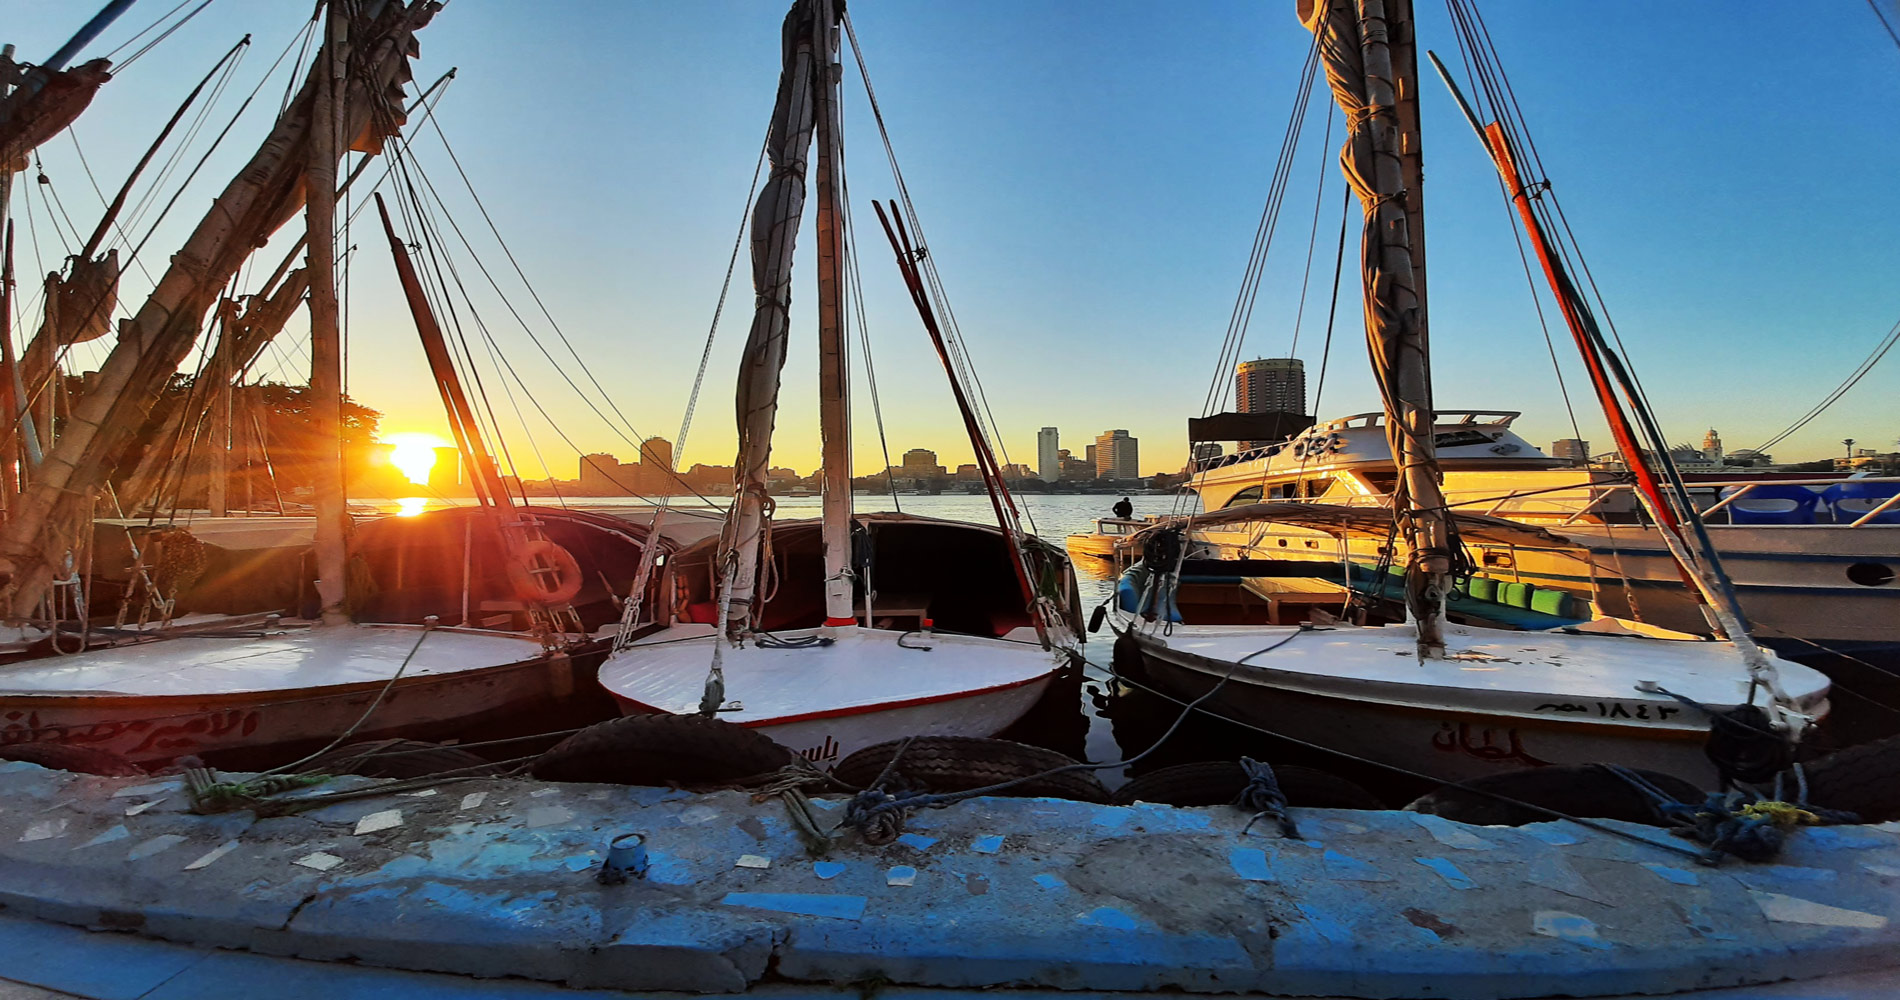 Sunset  Felucca ride by Nile with Khan El-Khlili Market and Fishawi's cafe 